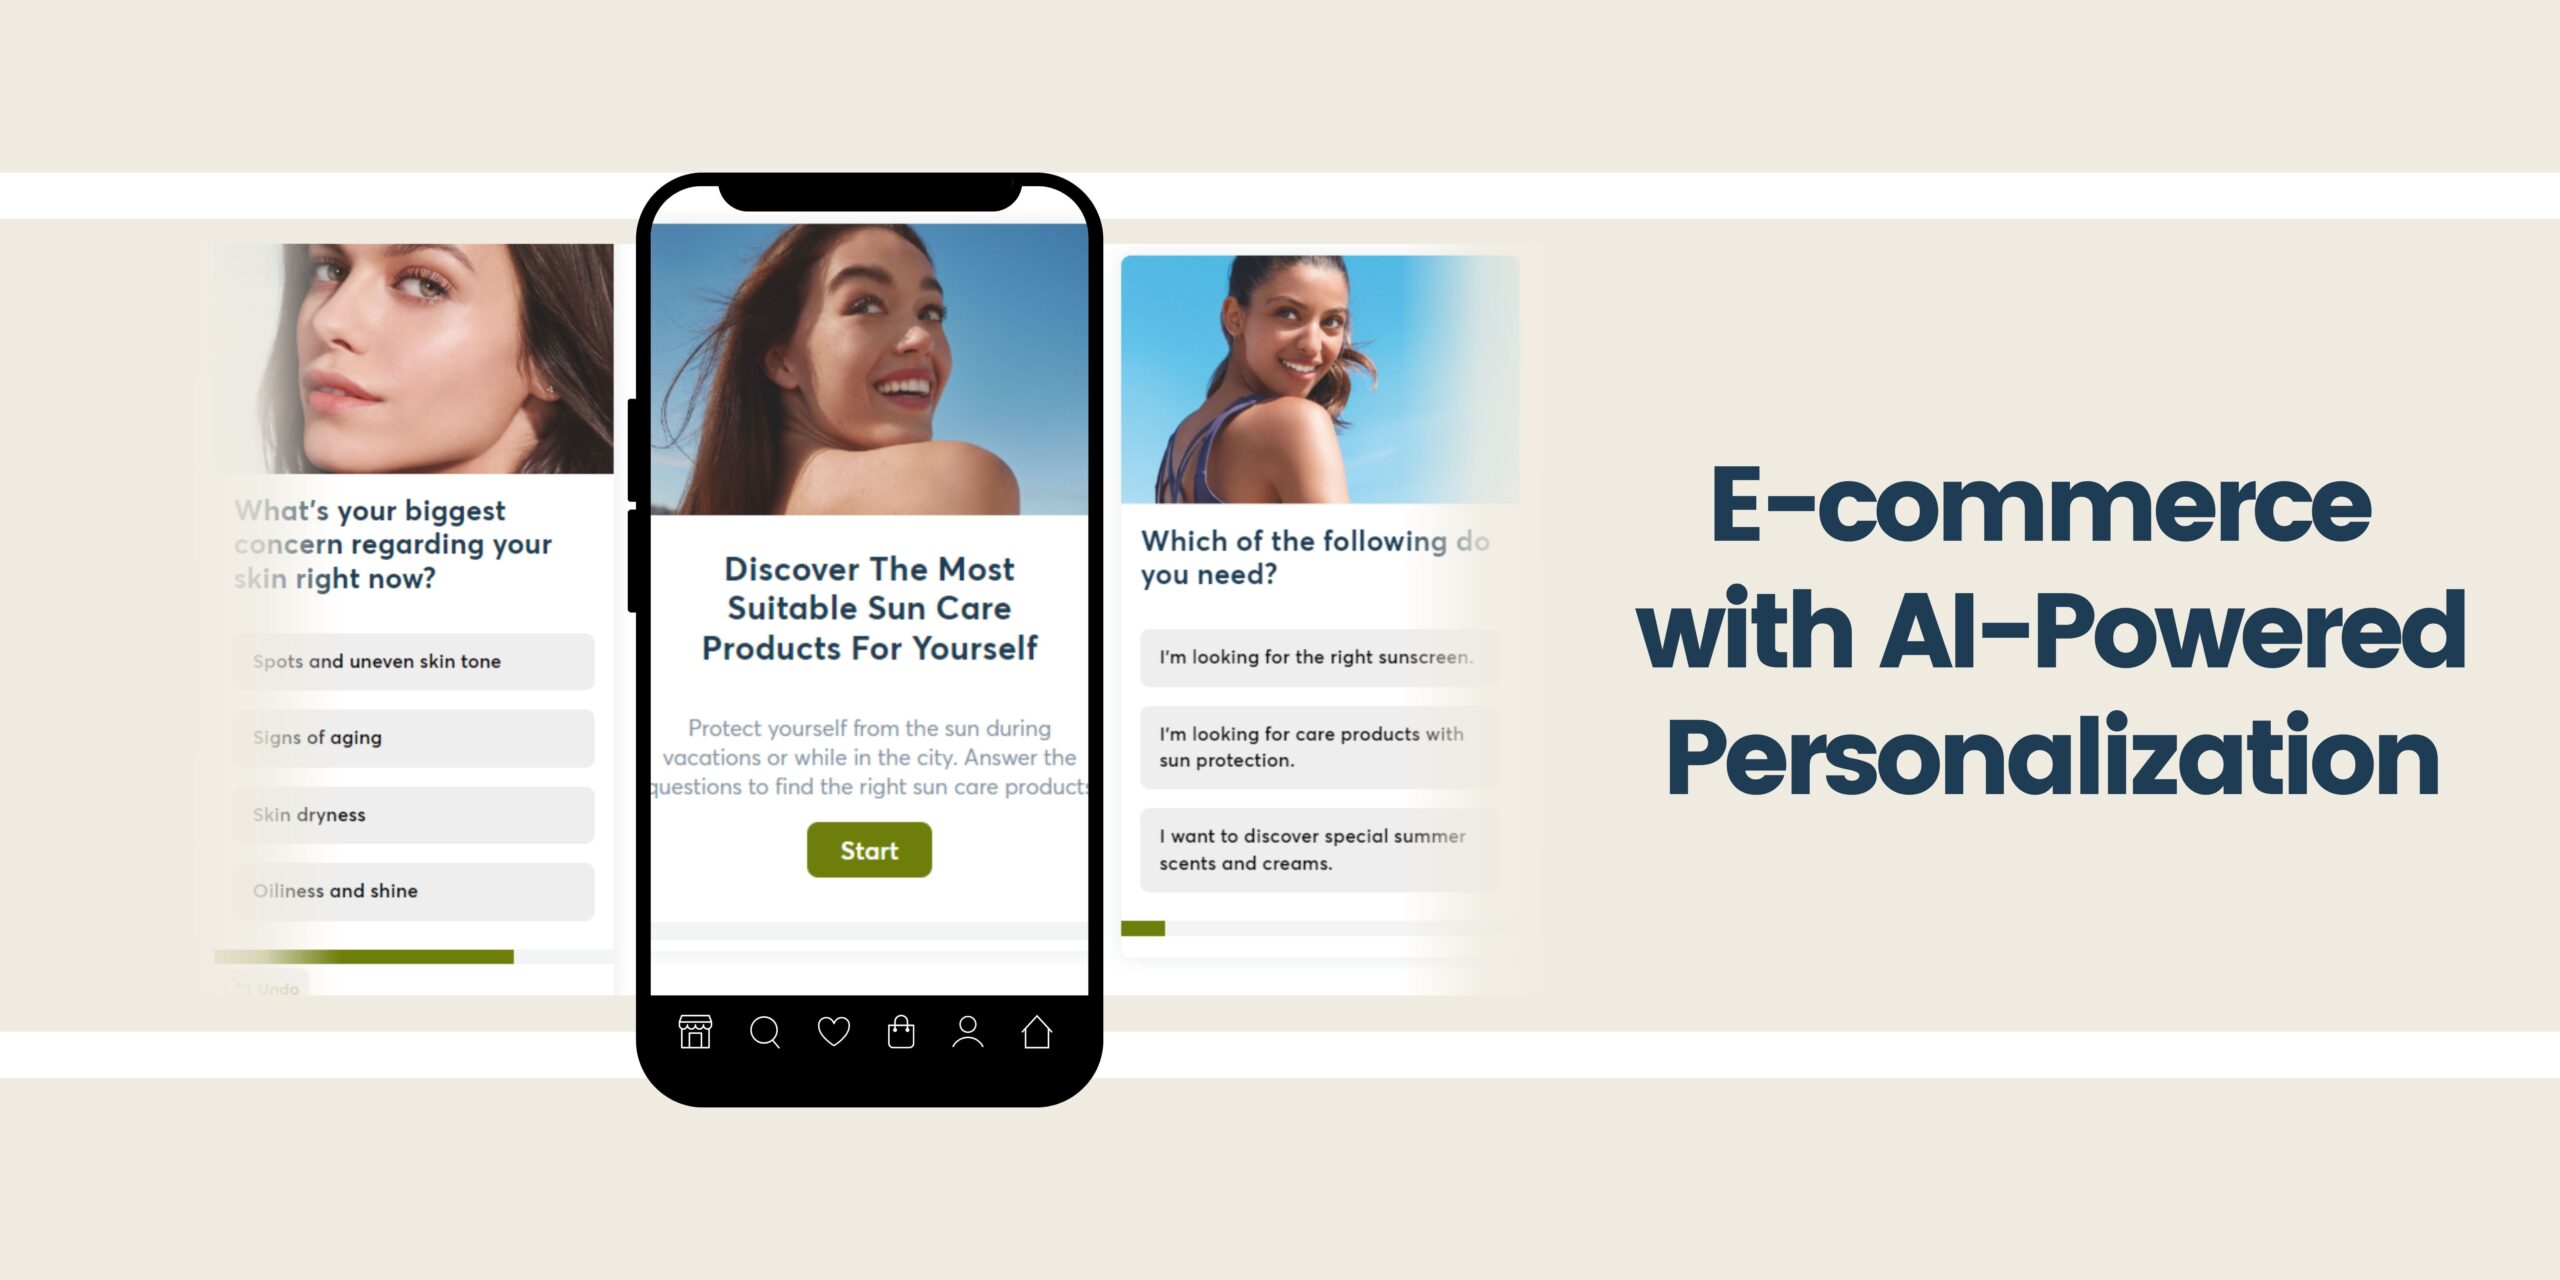 E-commerce with AI-Powered Personalization